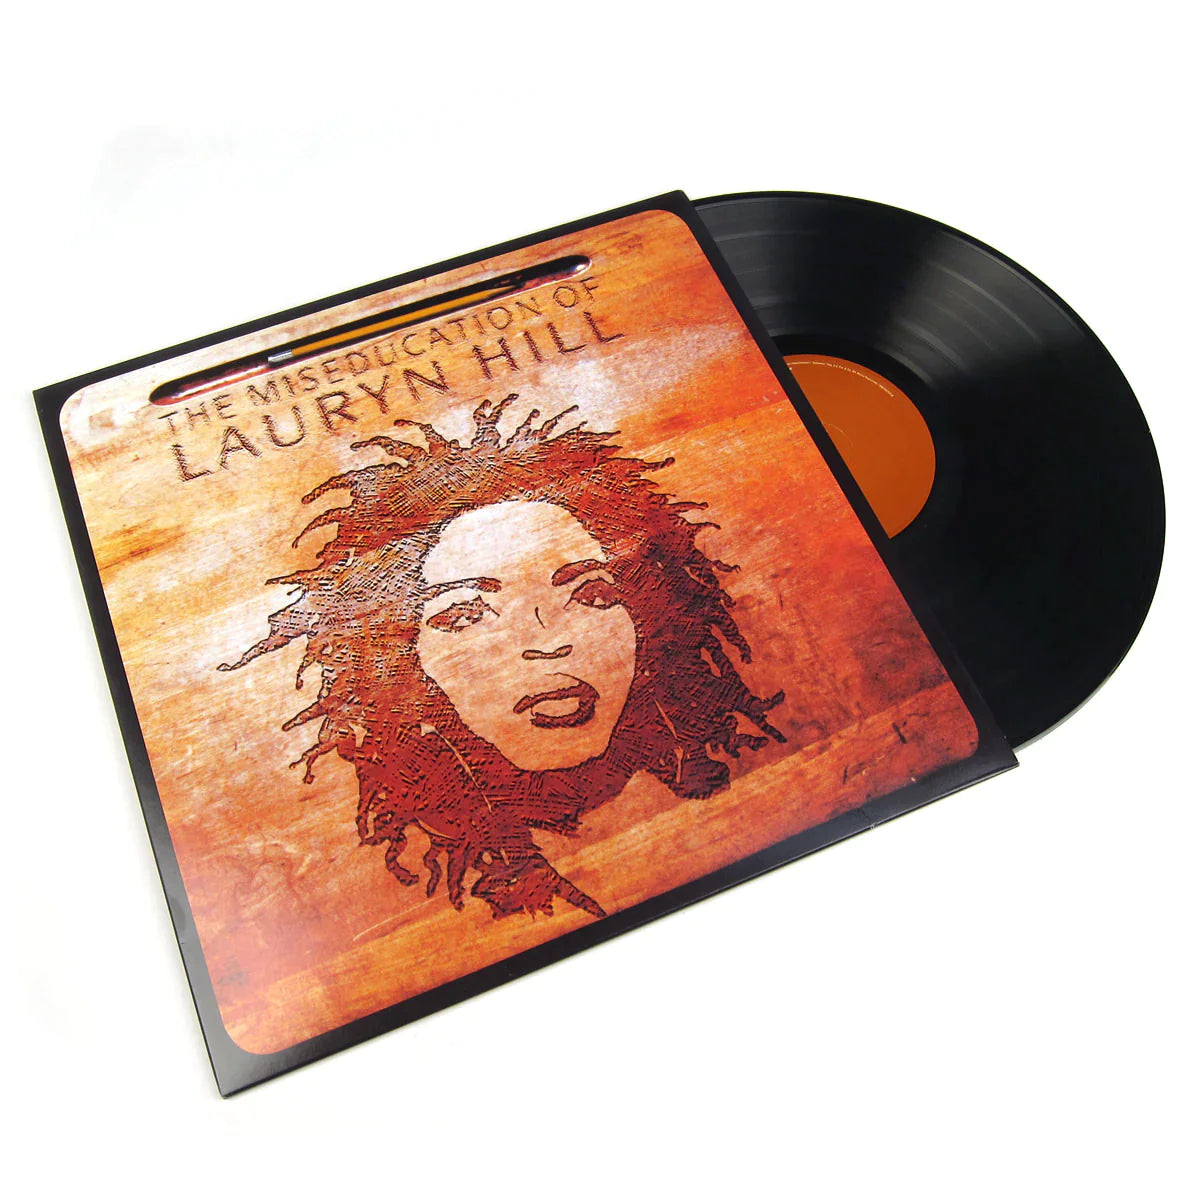 NEW/SEALED! Lauryn Hill - The Miseducation of Lauryn Hill (2 Lp's)